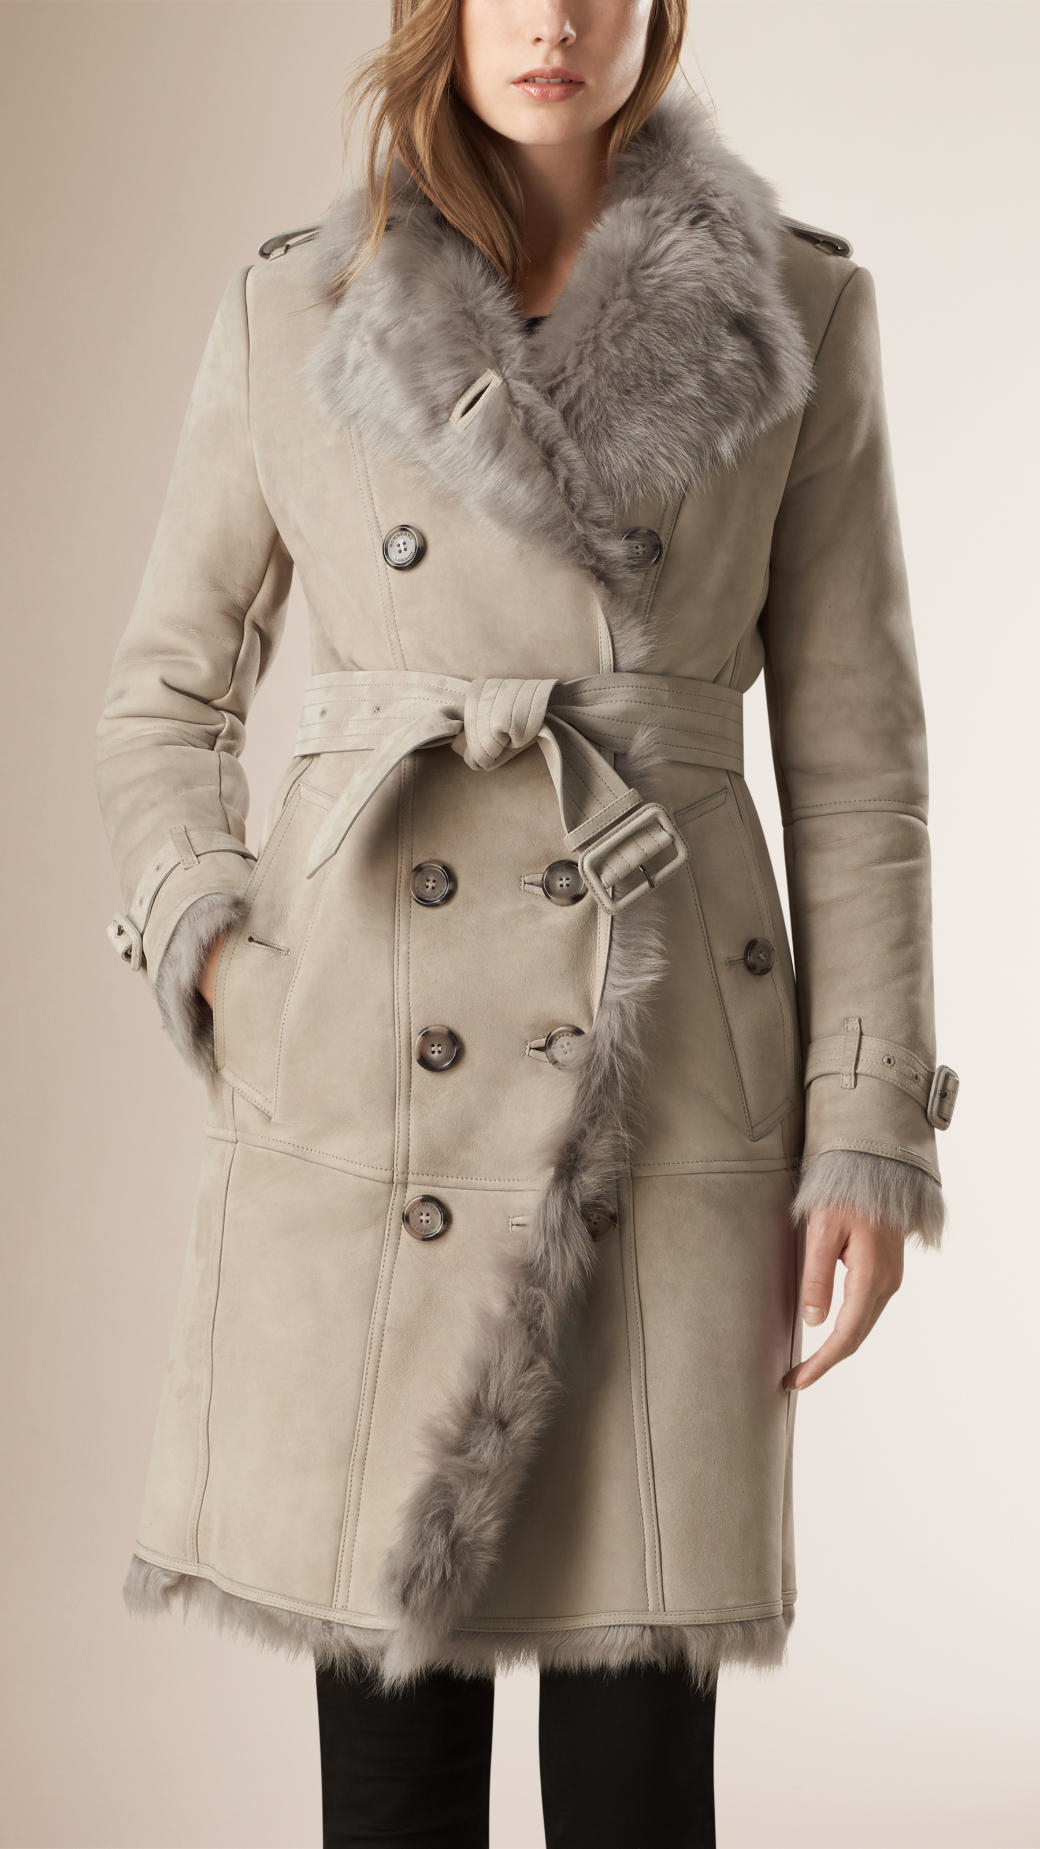 Burberry Leather Shearling Trench Coat in Light Grey (Gray) - Lyst